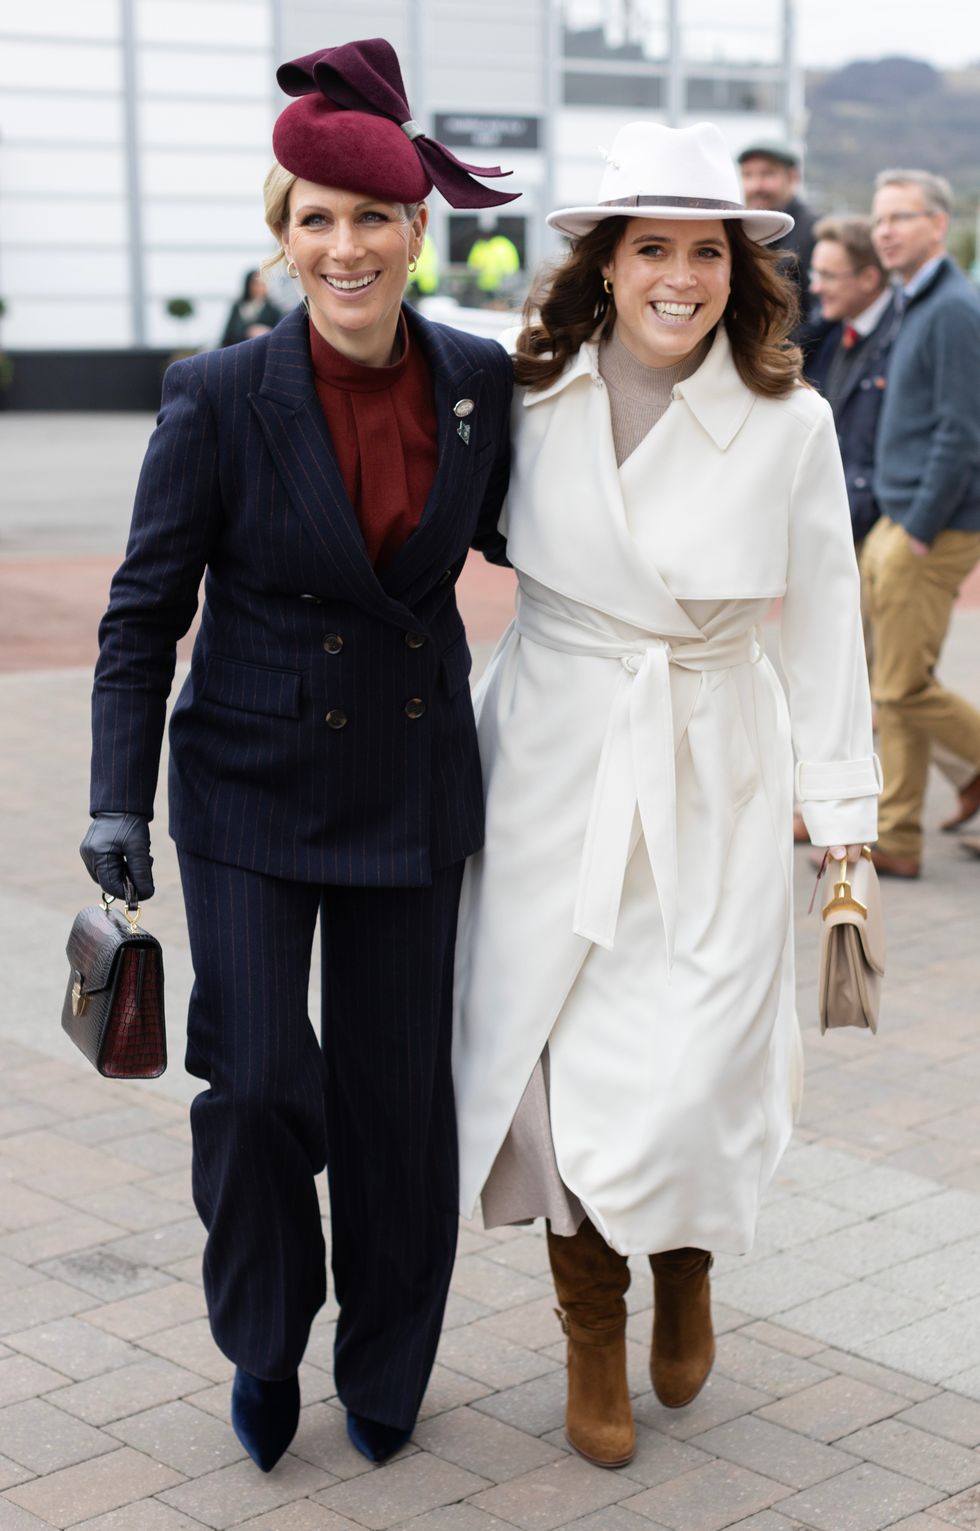 Zara Tindall and Princess Eugenie Show Out in Their Horse-Racing Best